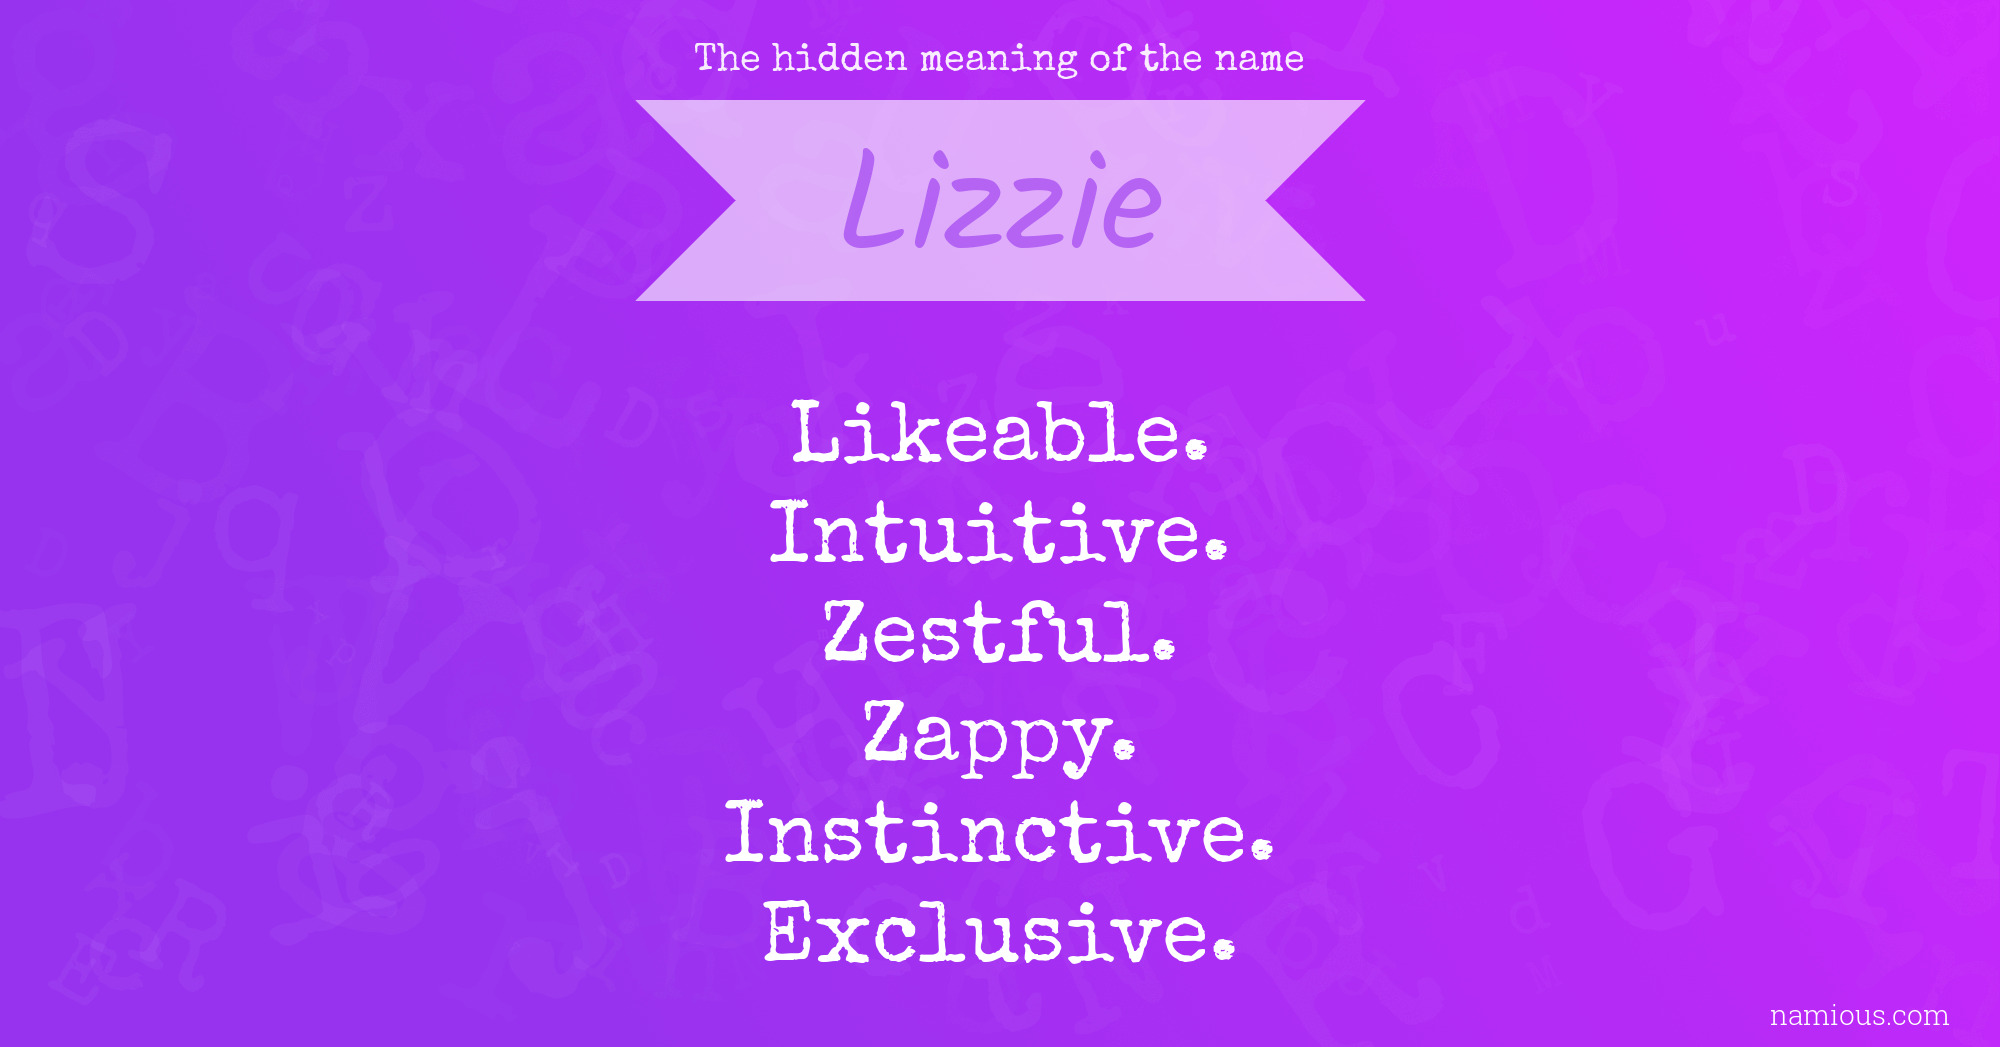 The hidden meaning of the name Lizzie